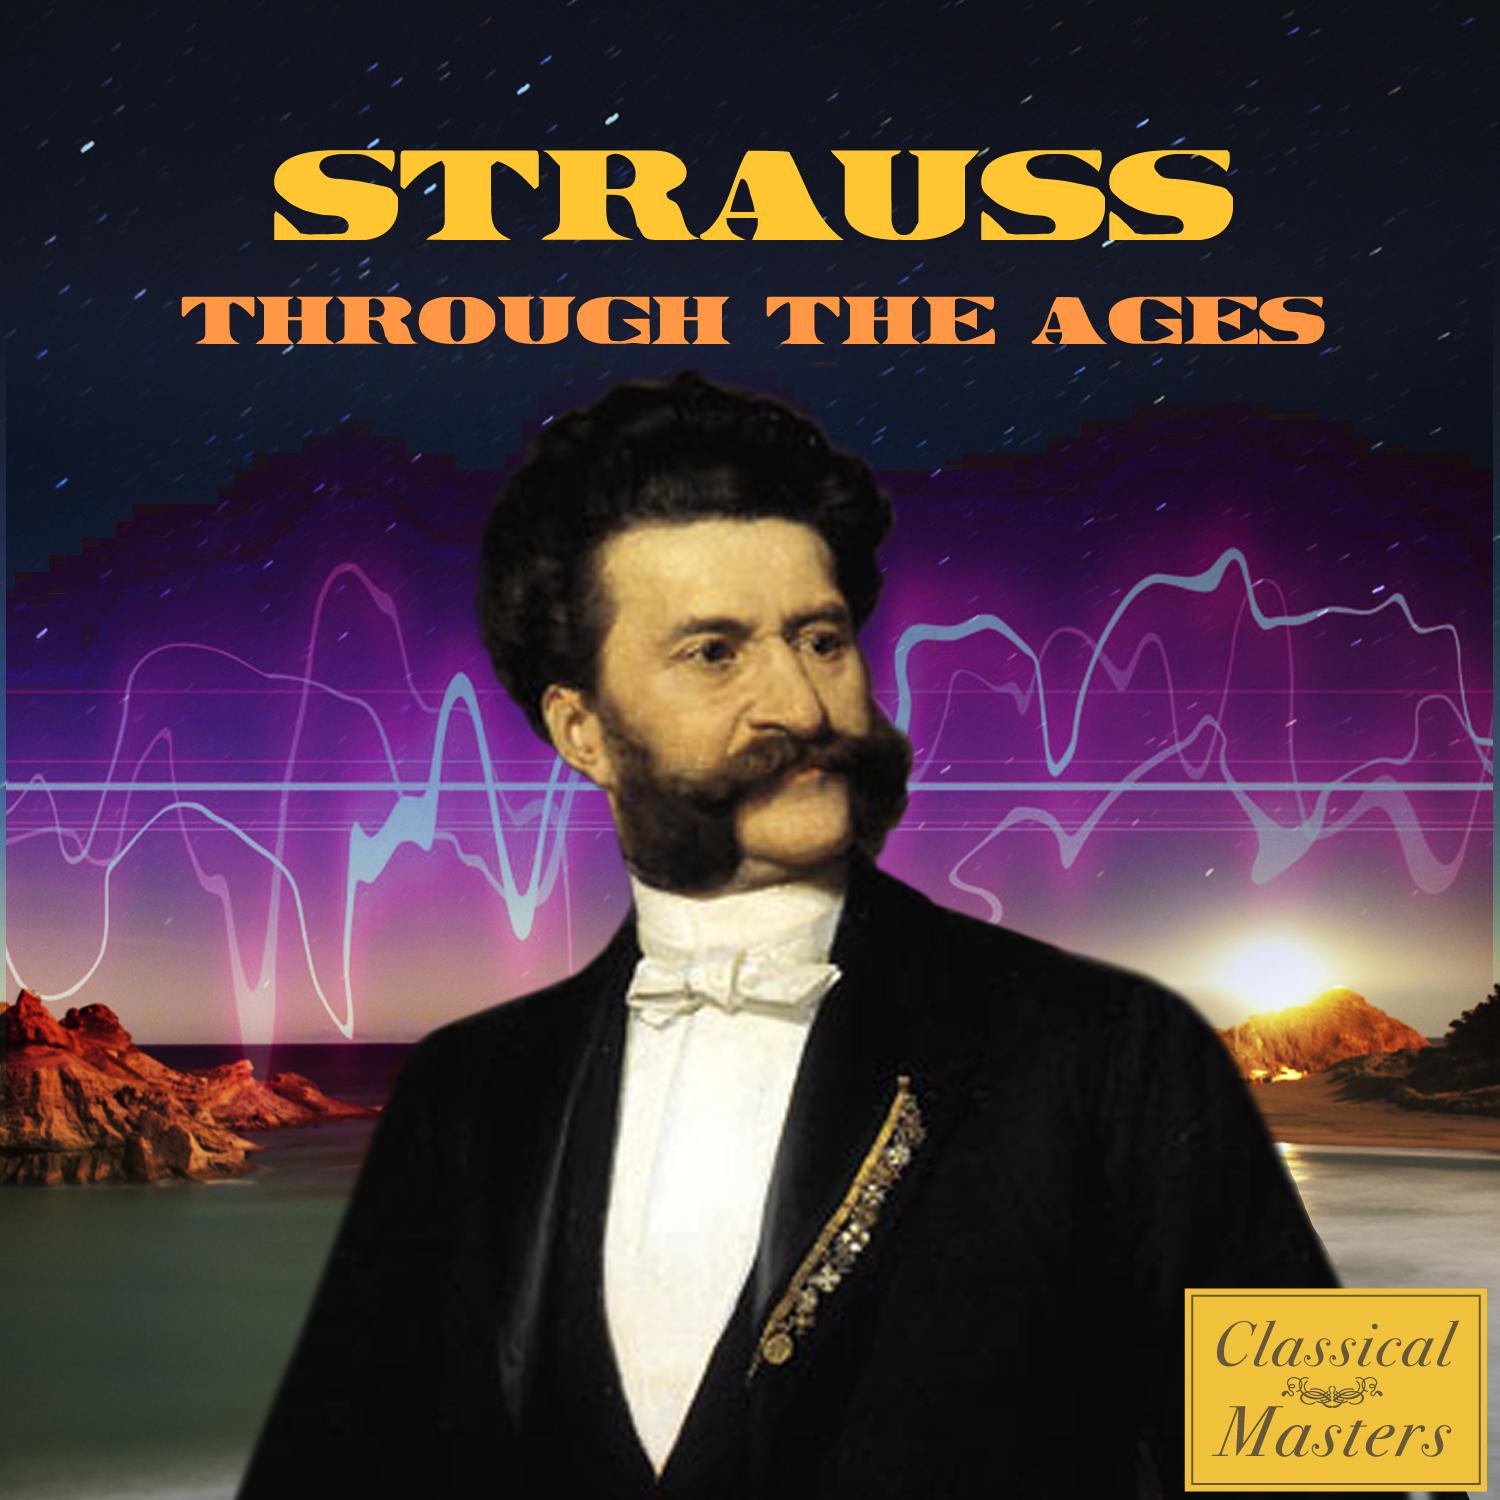 Strauss Through the Ages